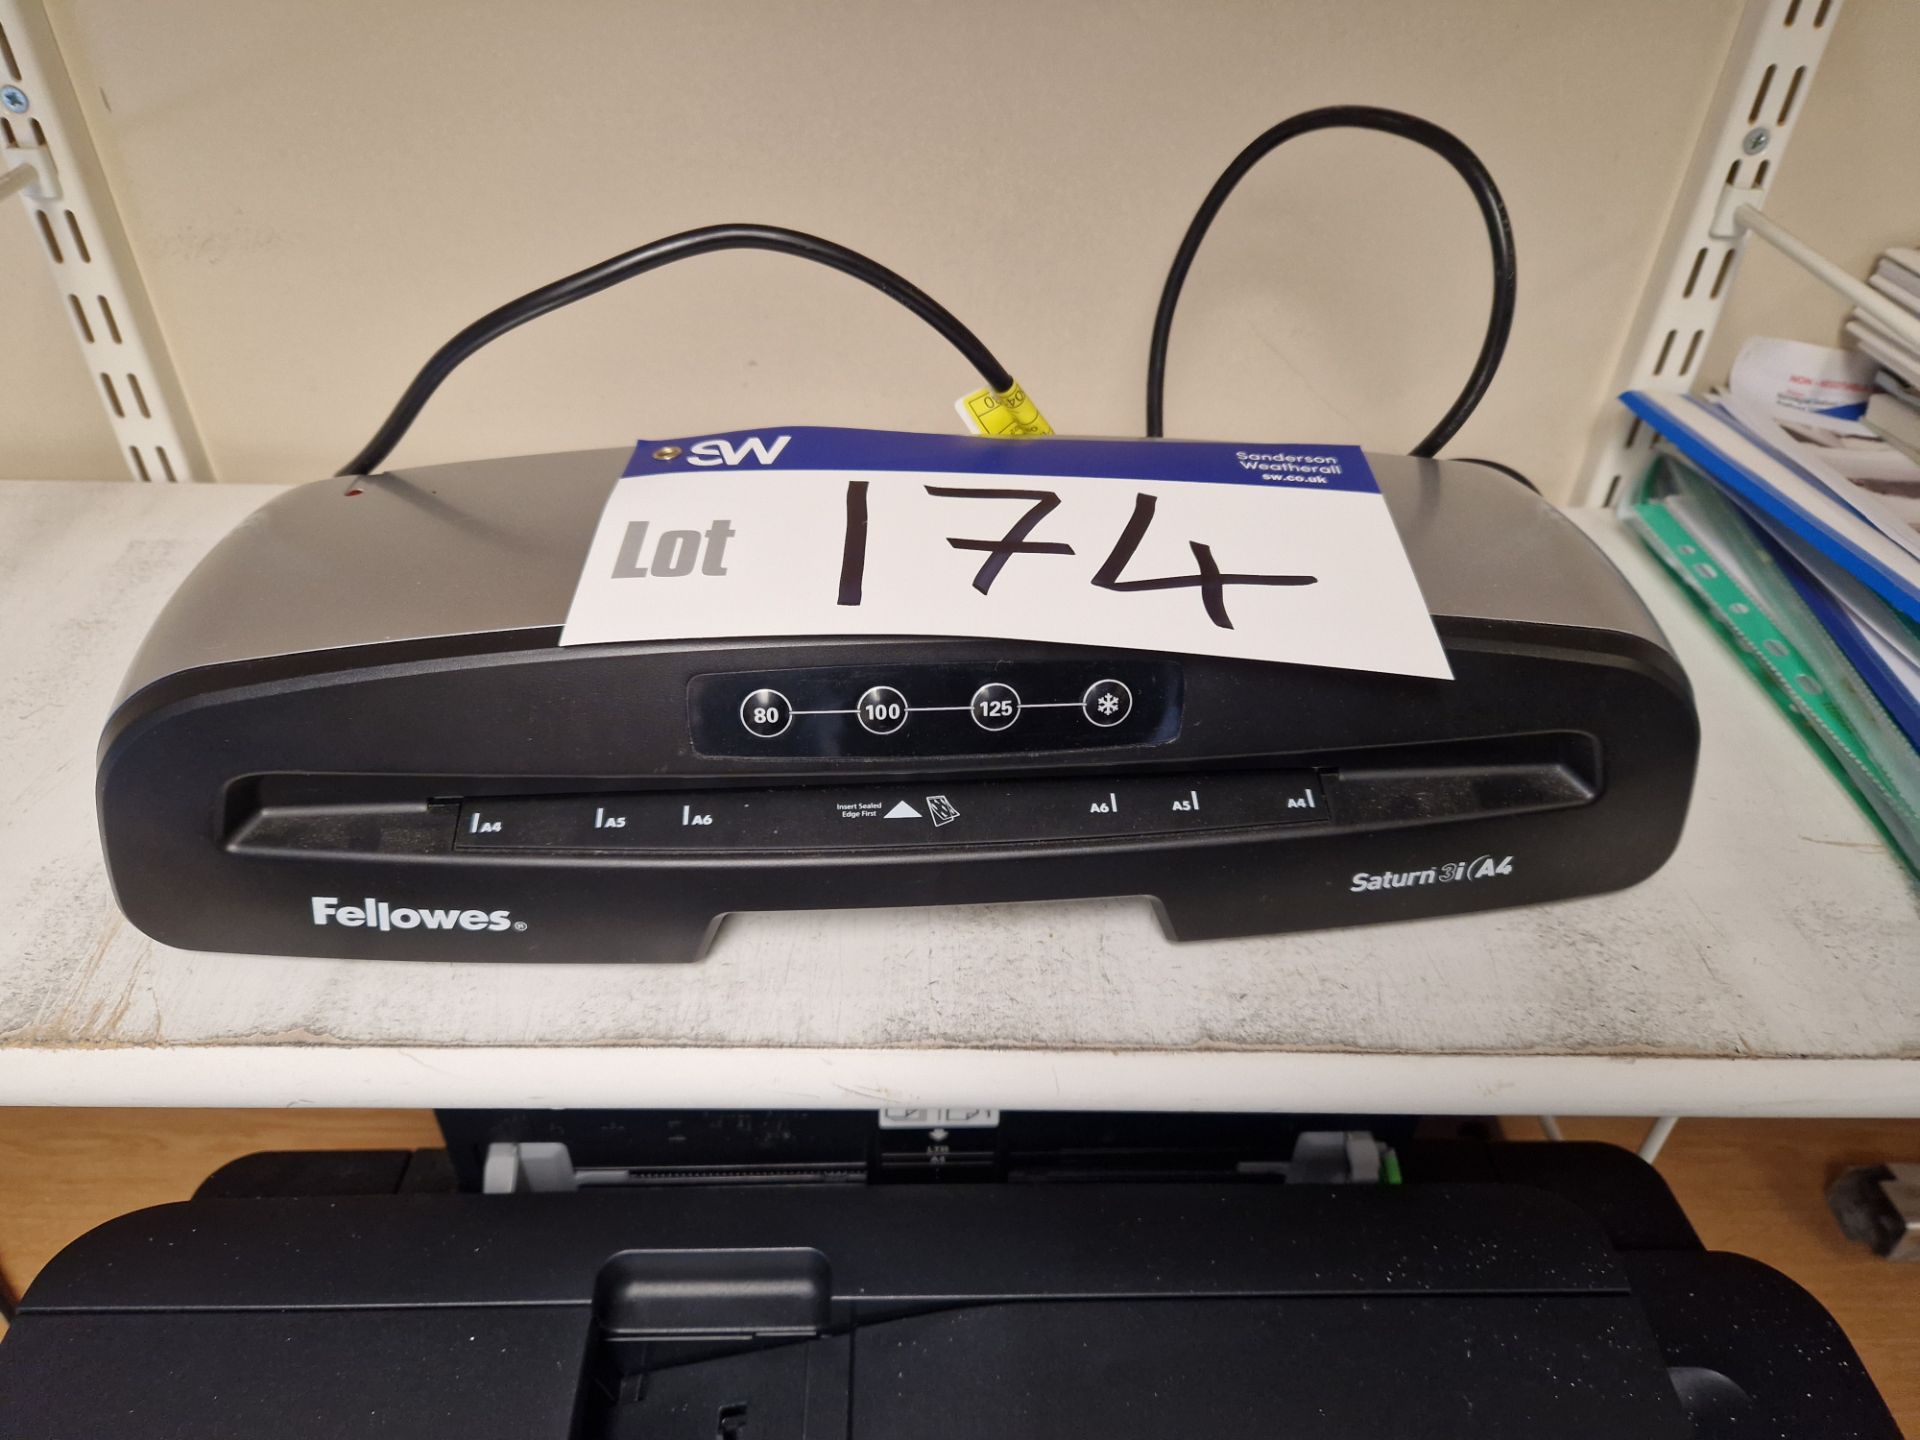 Fellowes Saturn 3IA4 LaminatorPlease read the following important notes:- ***Overseas buyers - All